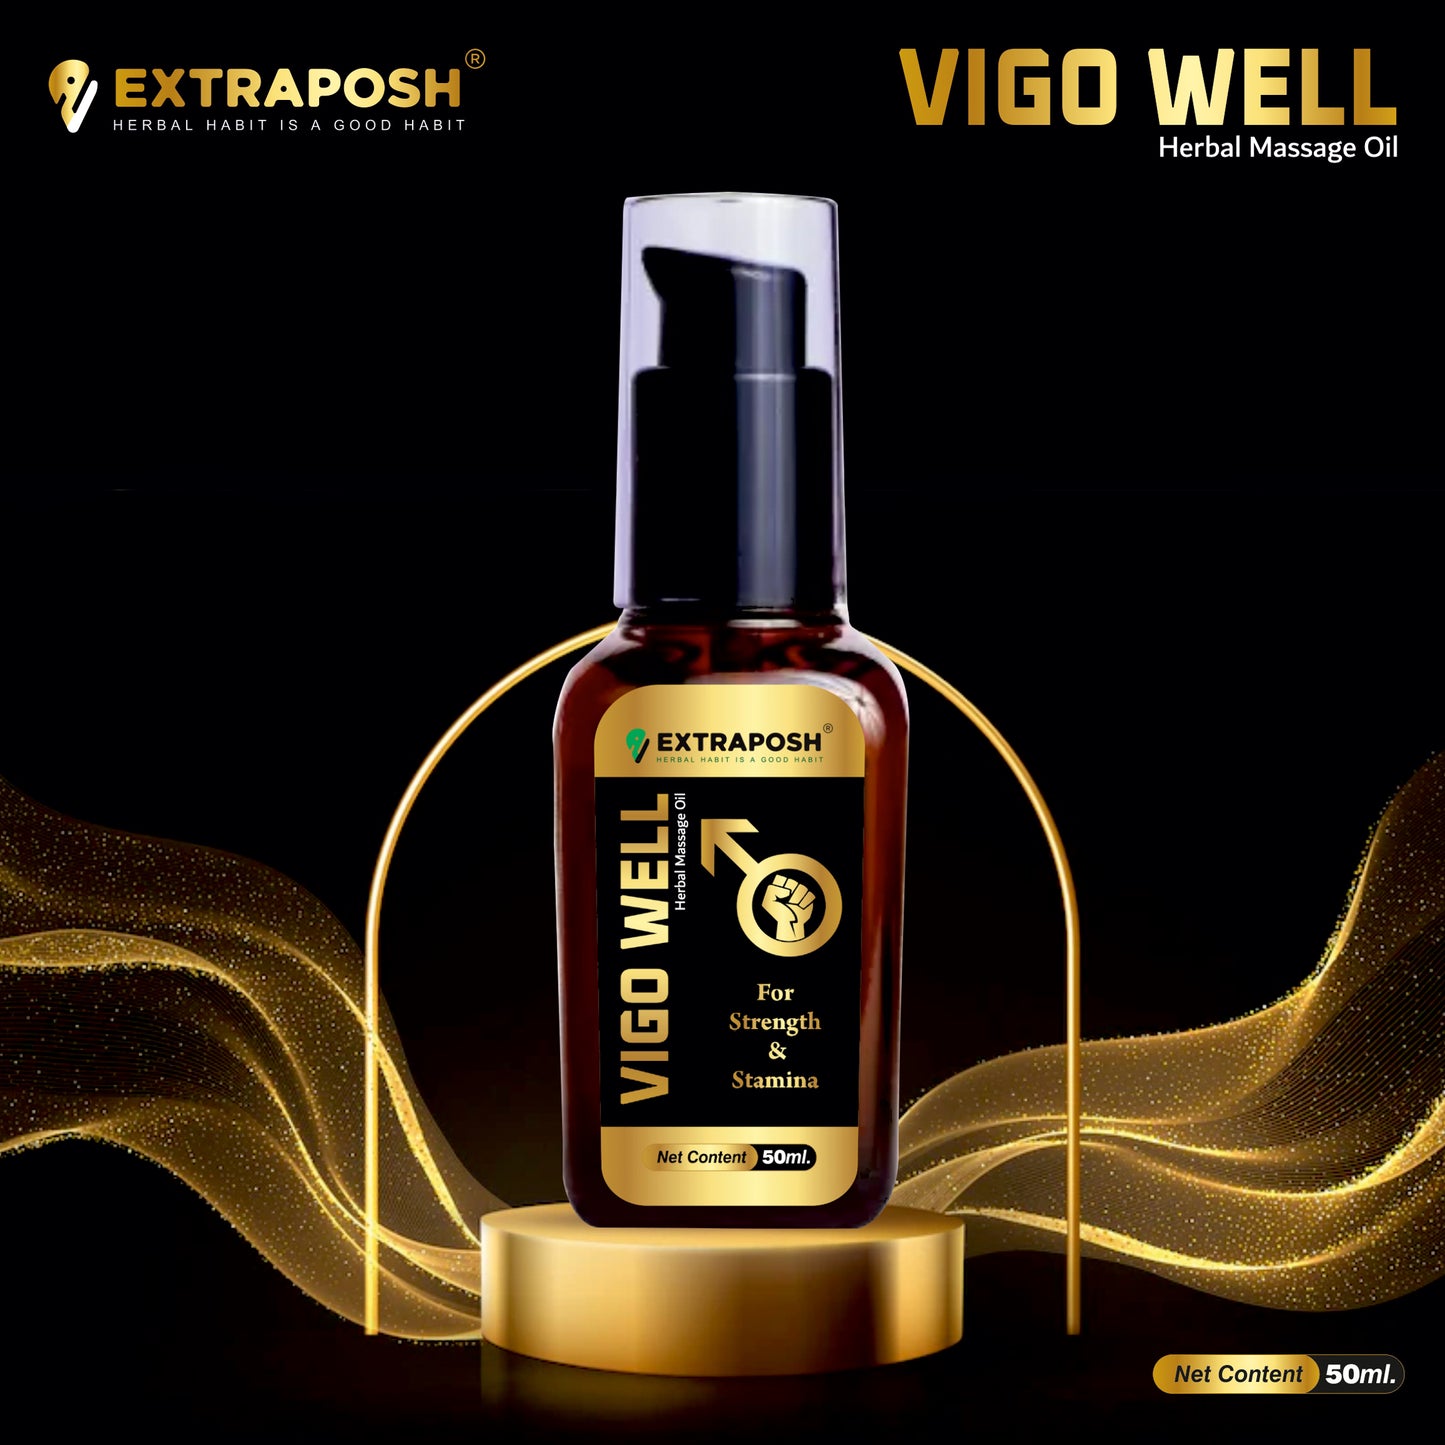 Vigo Well massage oil is usefull in Lift Up your Confidence during sex